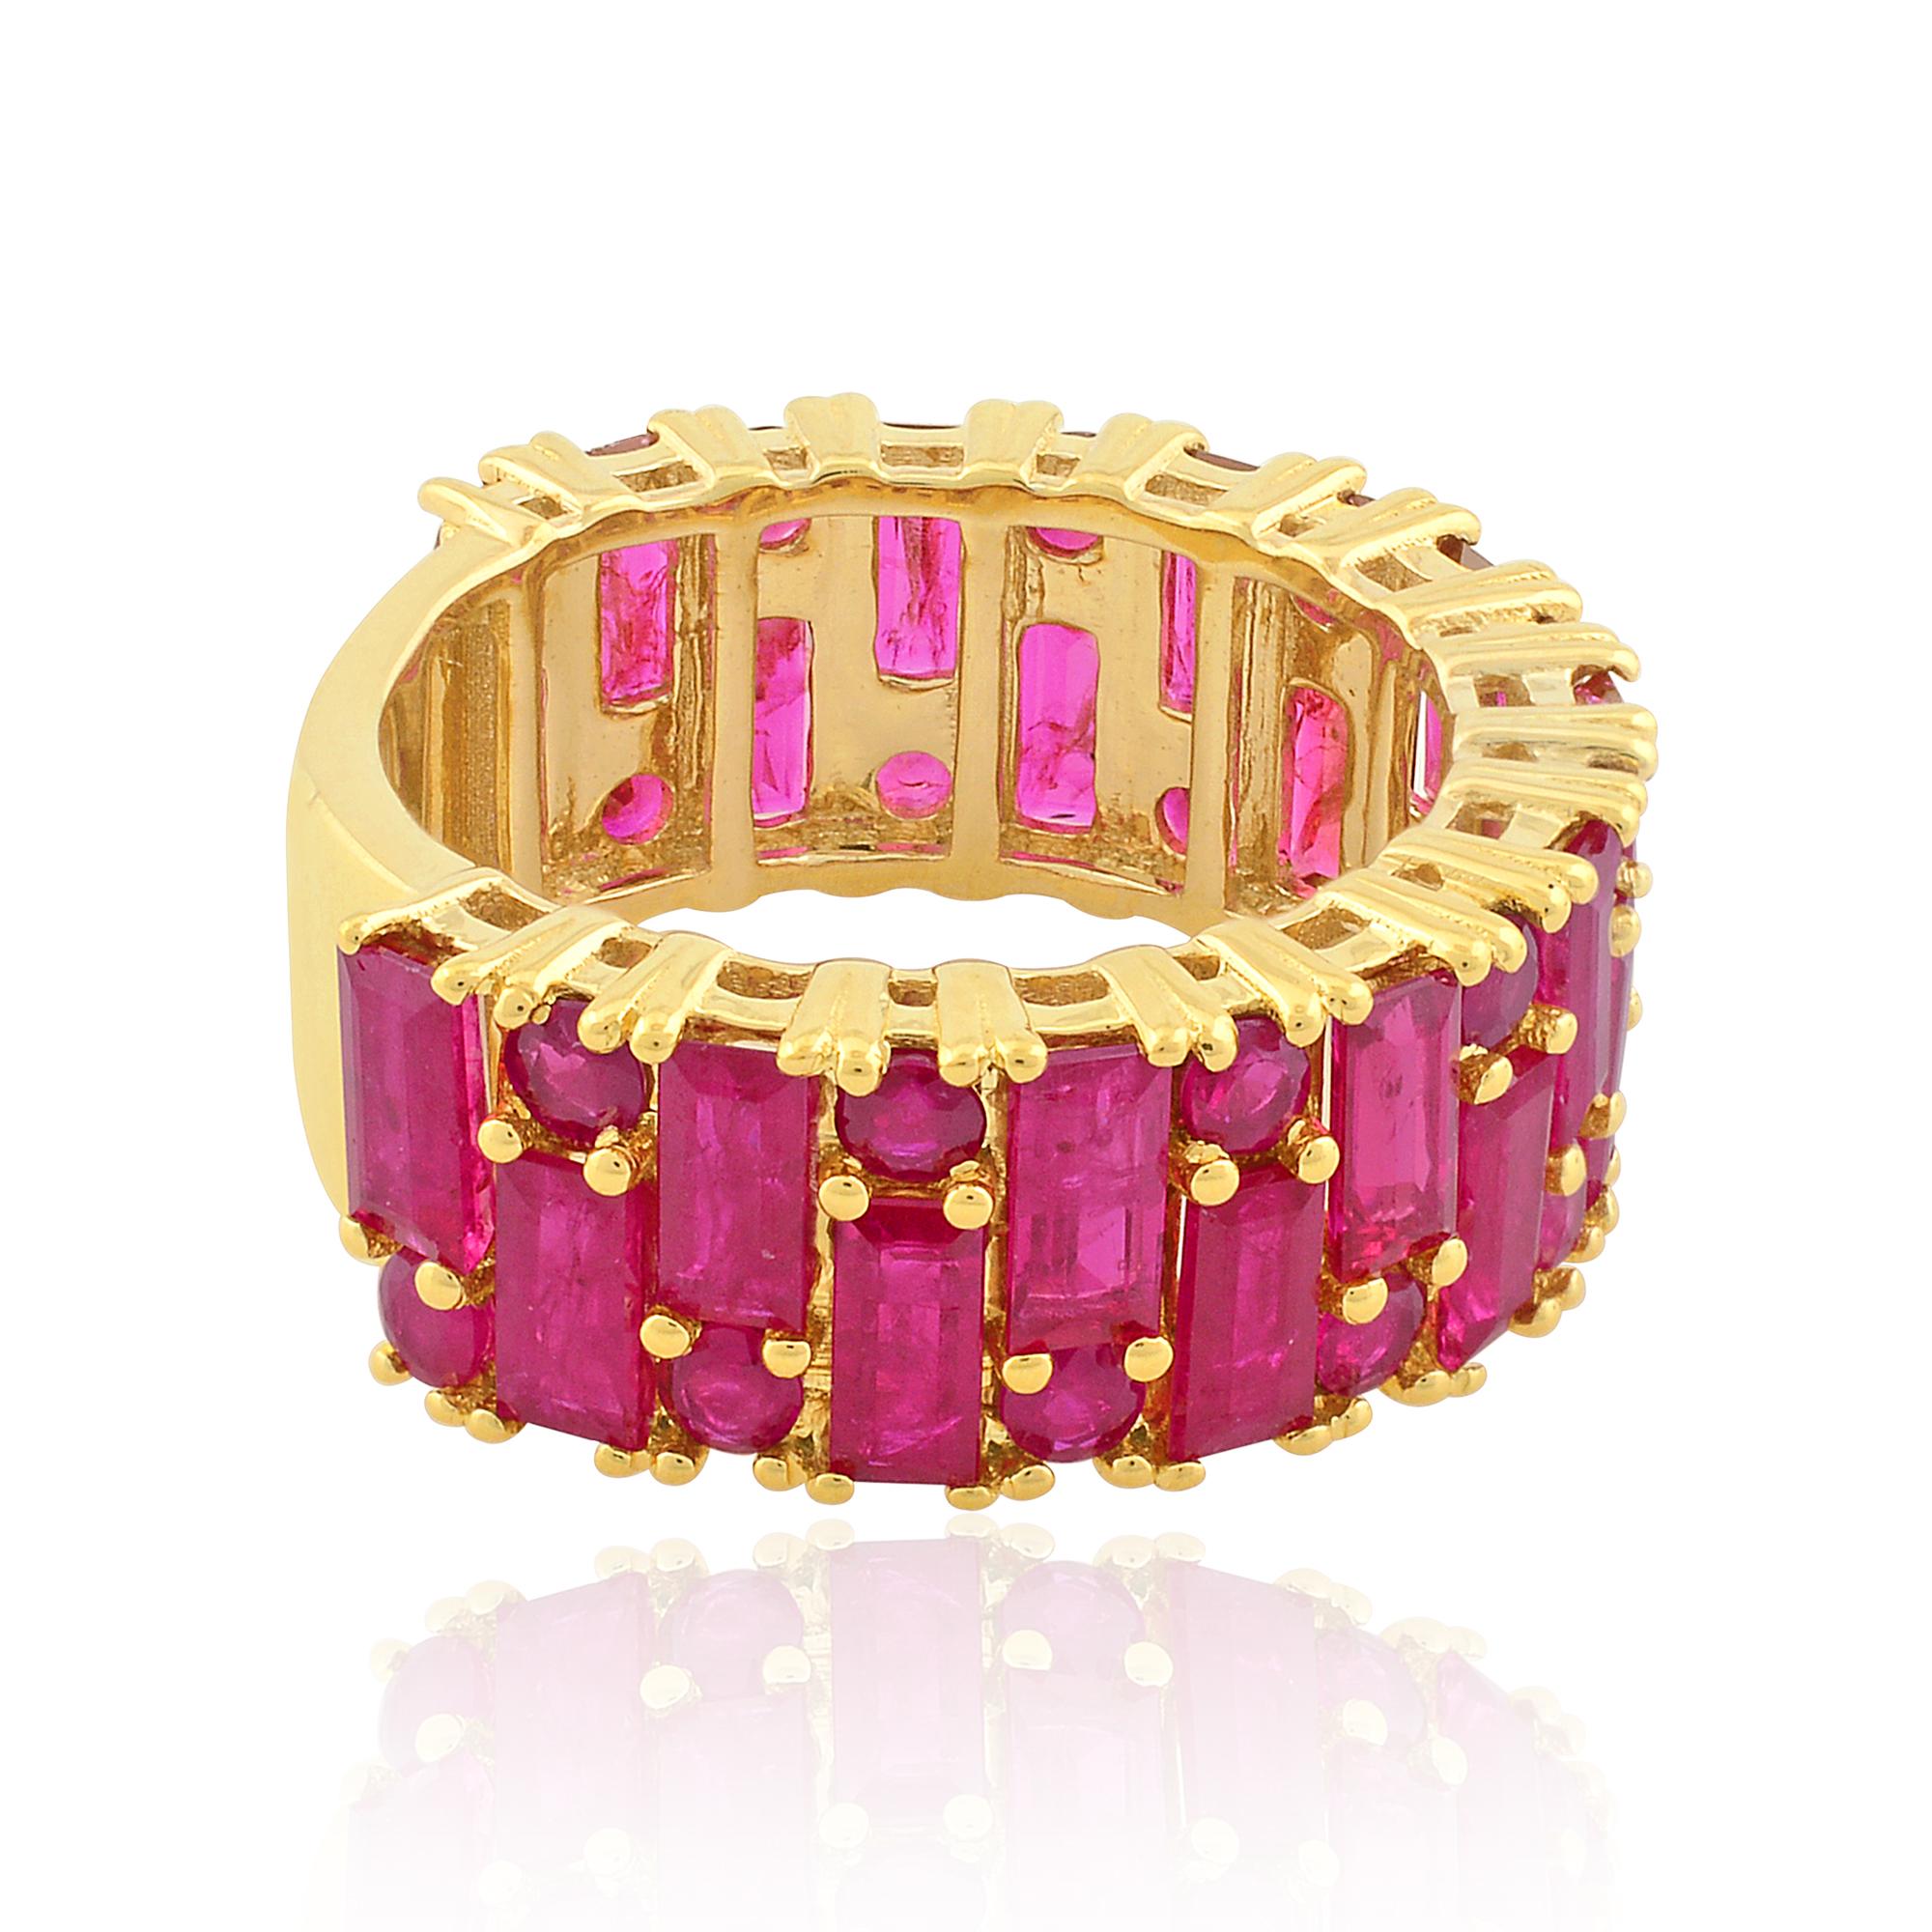 Item Code :- SER-2568 (14k)
Gross Weight :- 6.37 gm
14k Solid Yellow Gold Weight :- 5.22 gm
Natural Ruby Weight :- 5.76 carat
Ring Size :- 7 US & All ring size available

✦ Sizing
.....................
We can adjust most items to fit your sizing